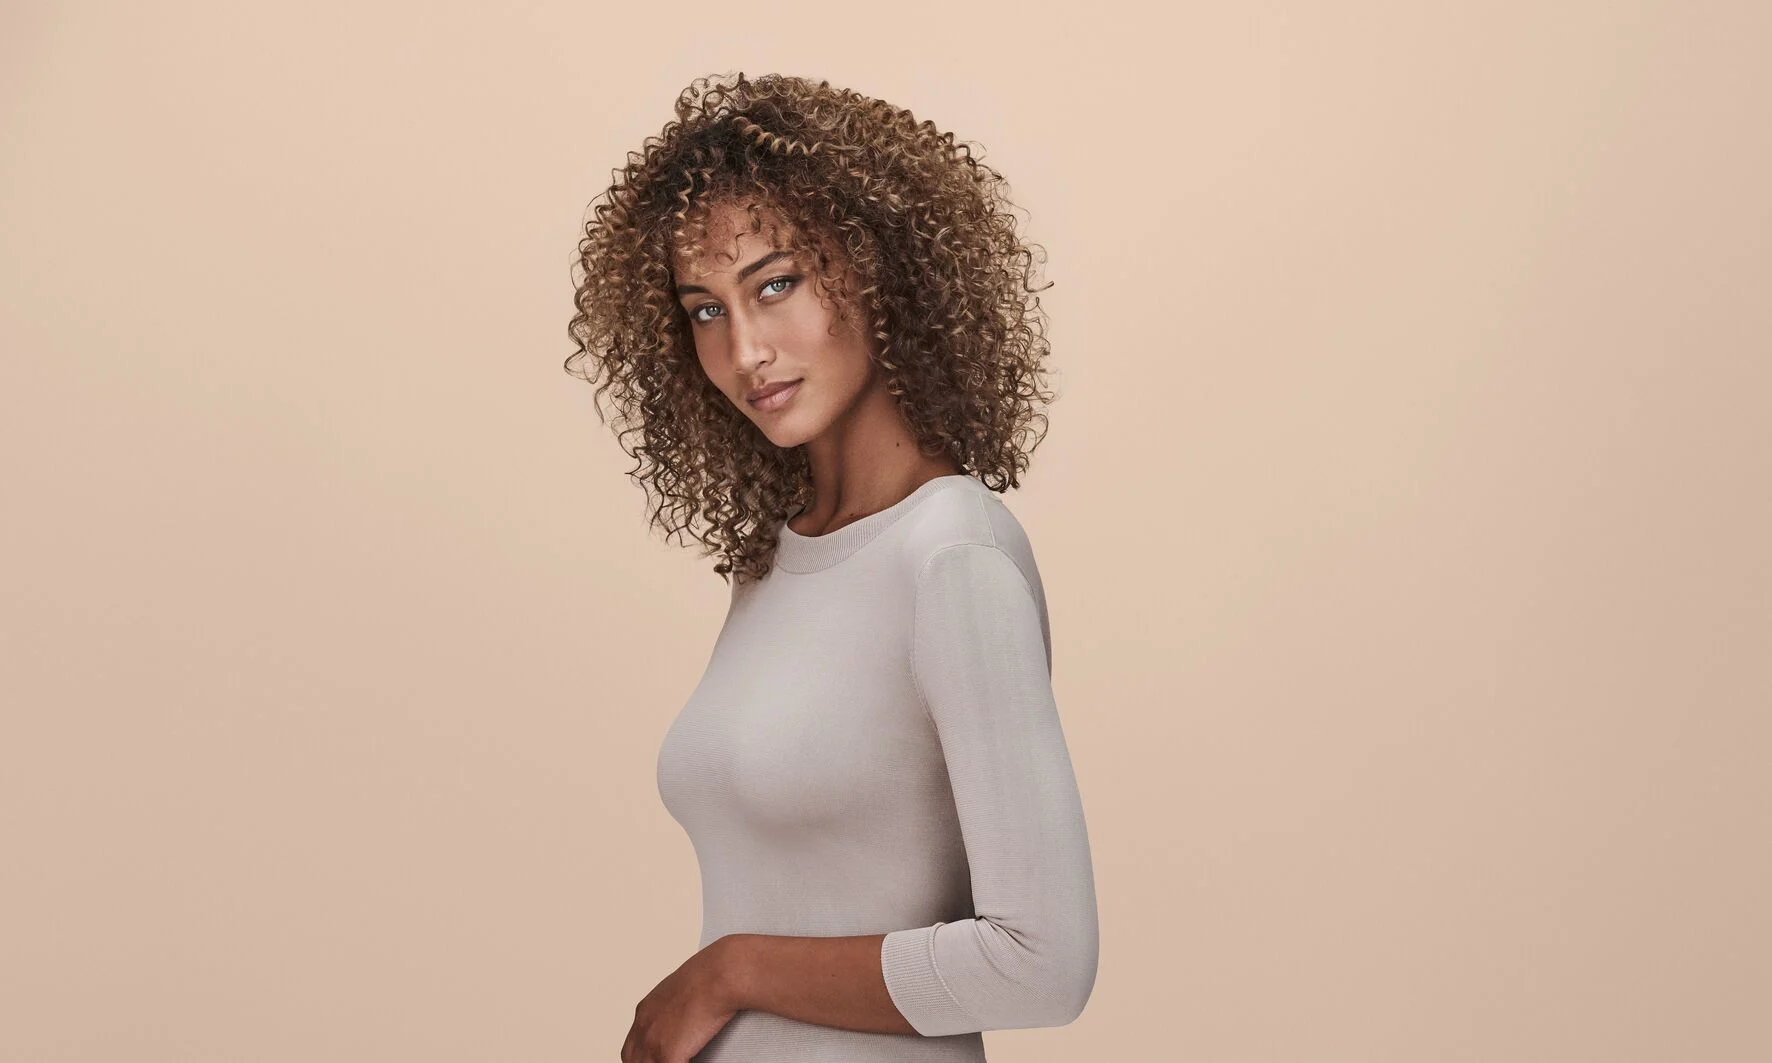 Image of model with healthy curls